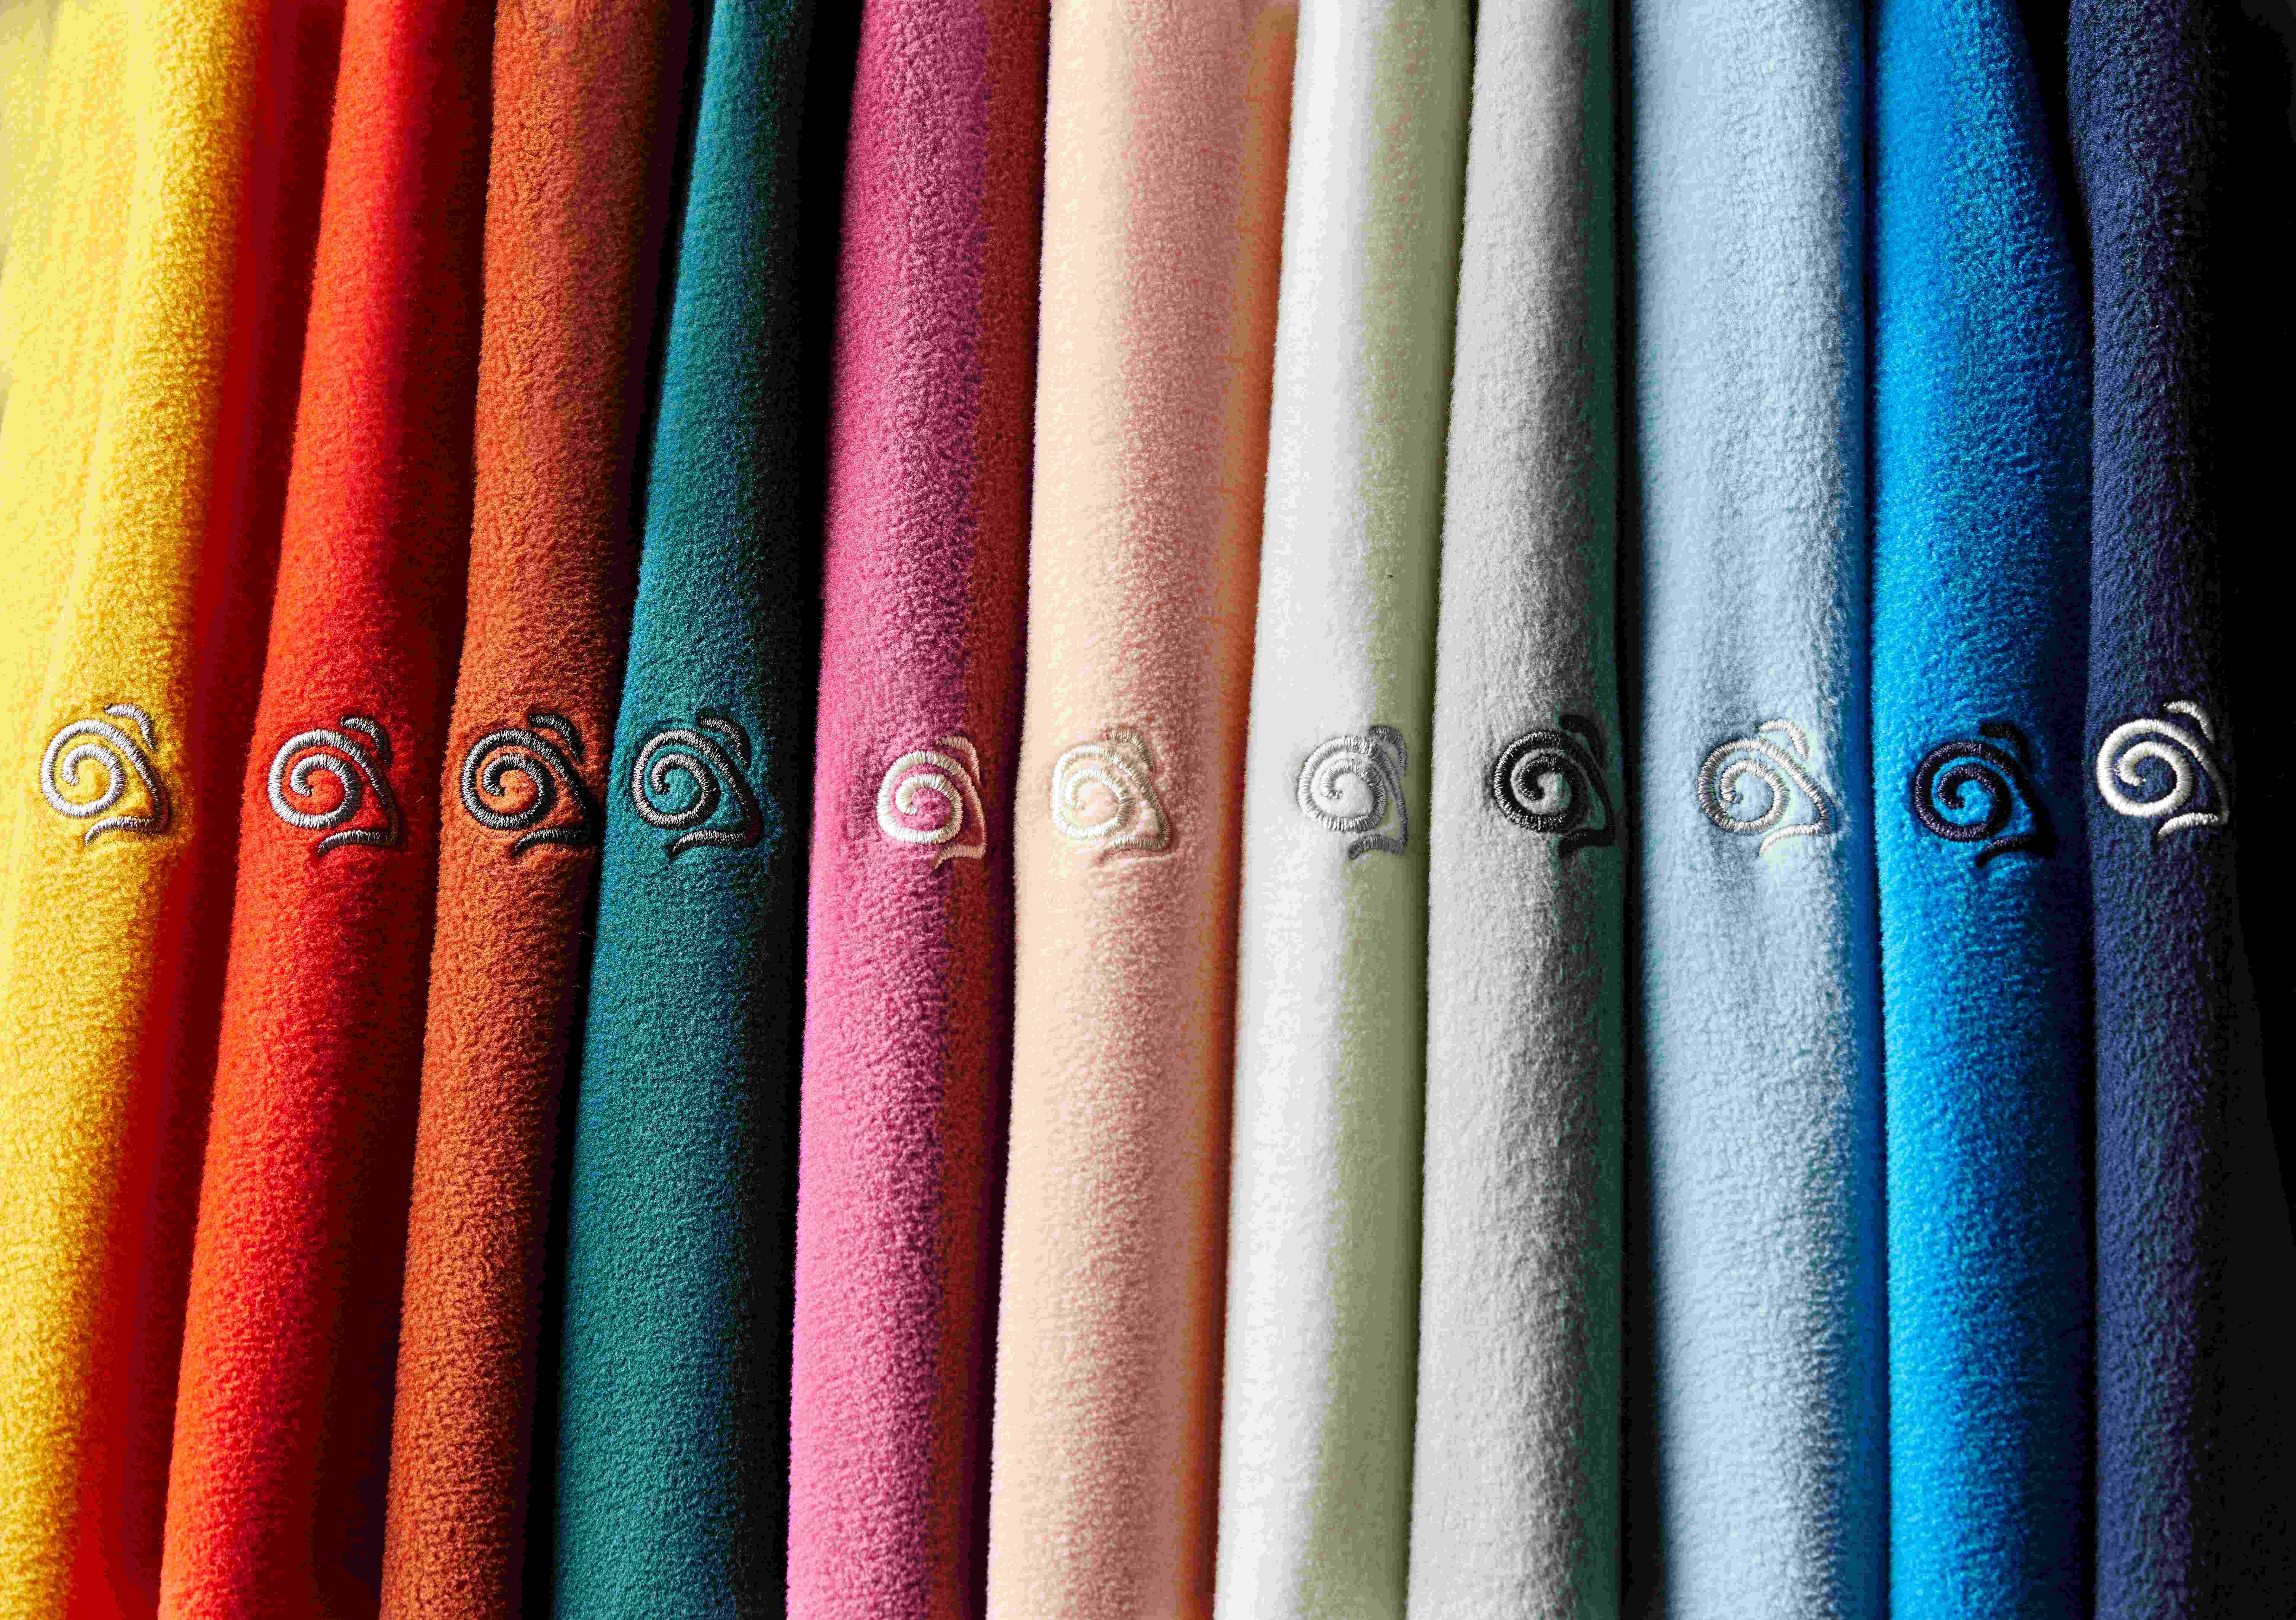 Craghoppers fleece, all different colours stacked next to each other showing the sleeve logo